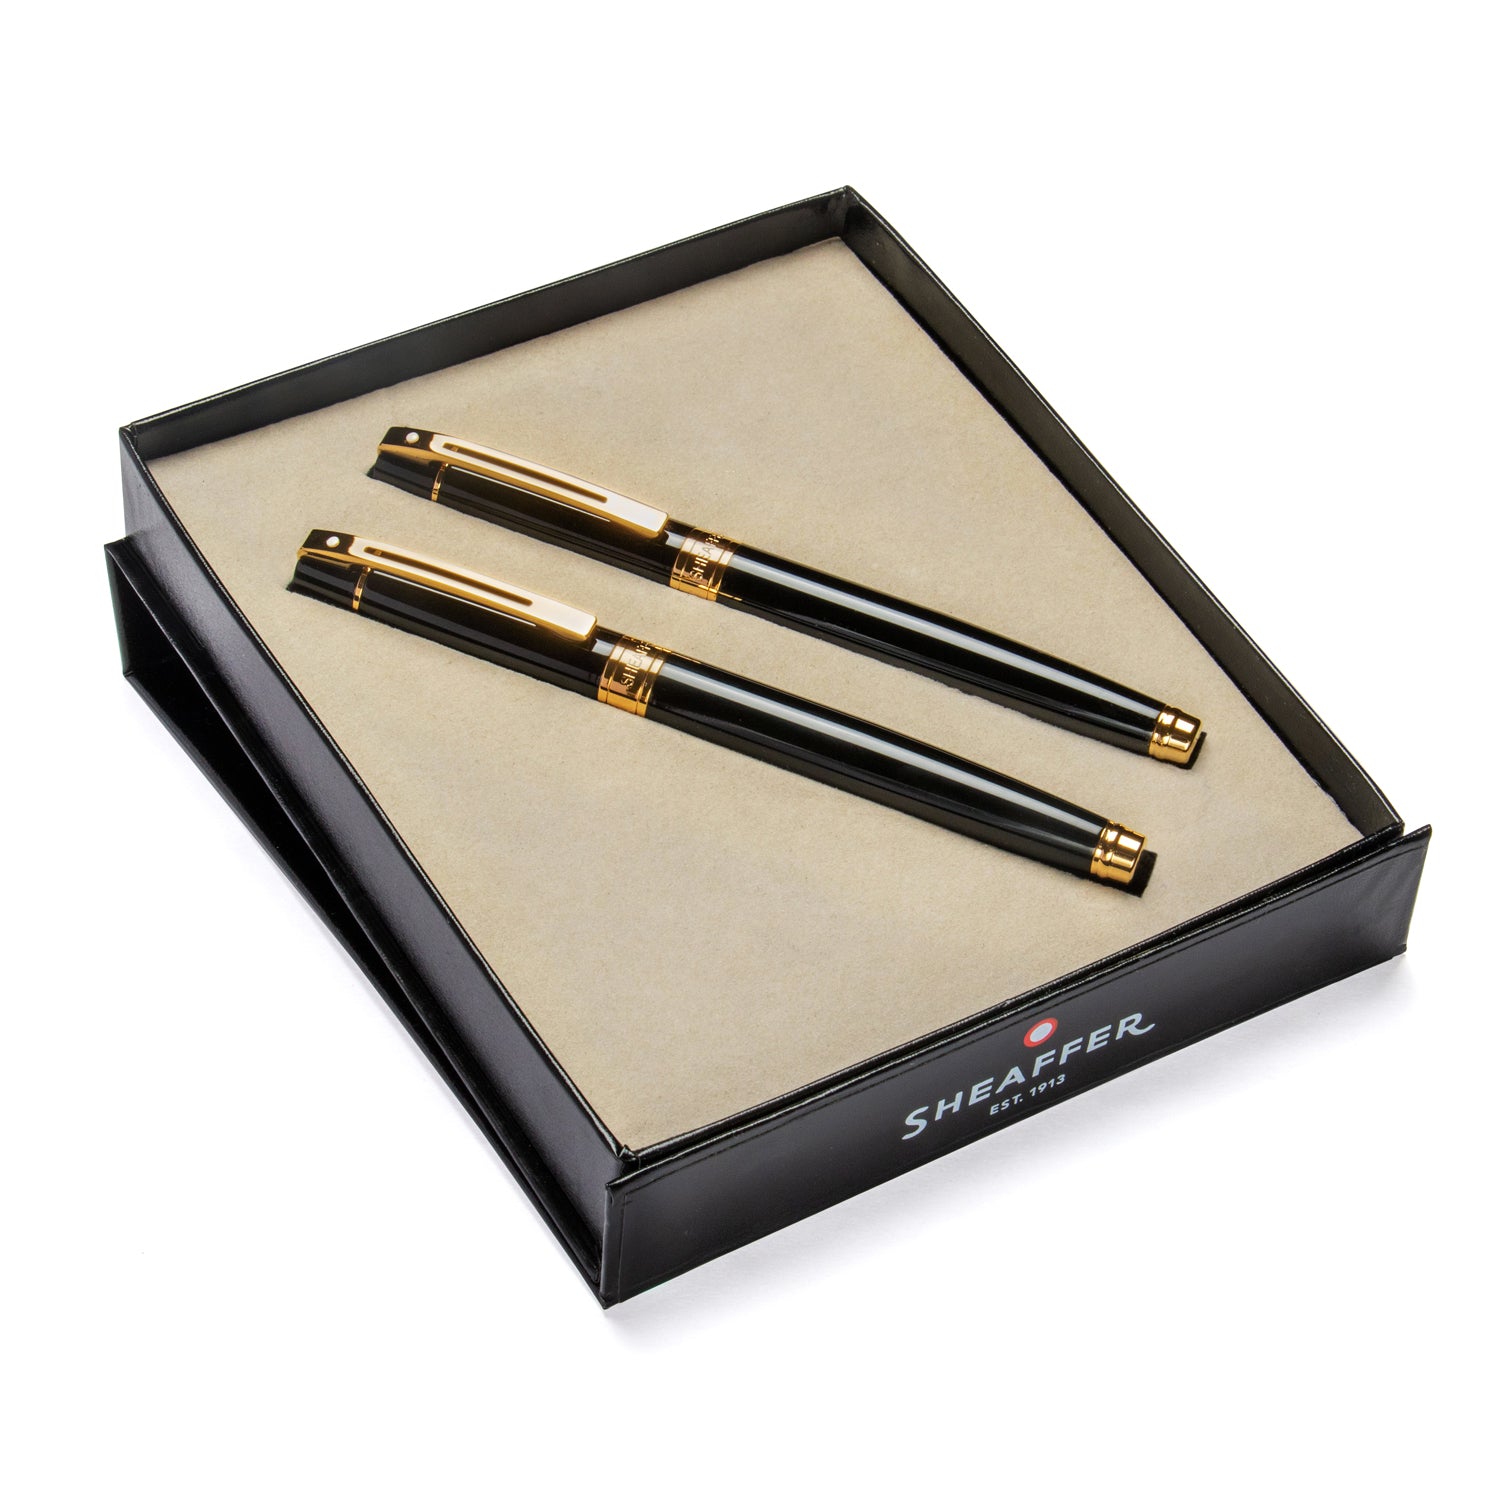 Wholesale Premium Metal Roller Refillable Ballpoint Pen With Fashionable  Design Ideal For Office, Business, And Executive Use Buy 2 Or Send Gift  From Paronas, $5.63 | DHgate.Com